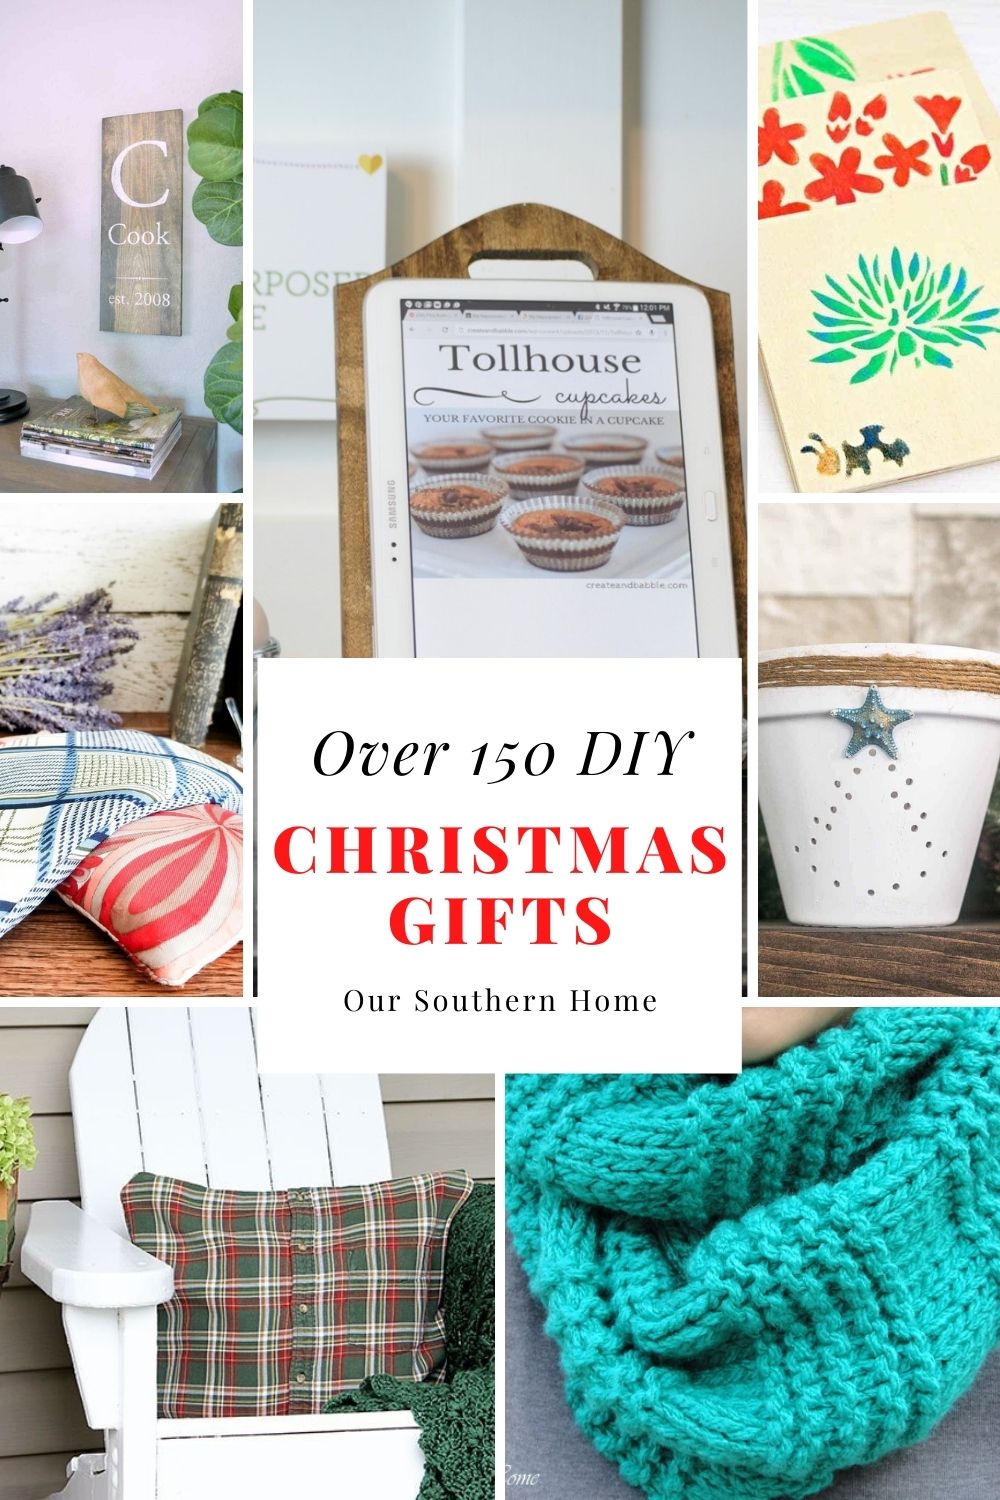 Our favourite home gifts for Christmas